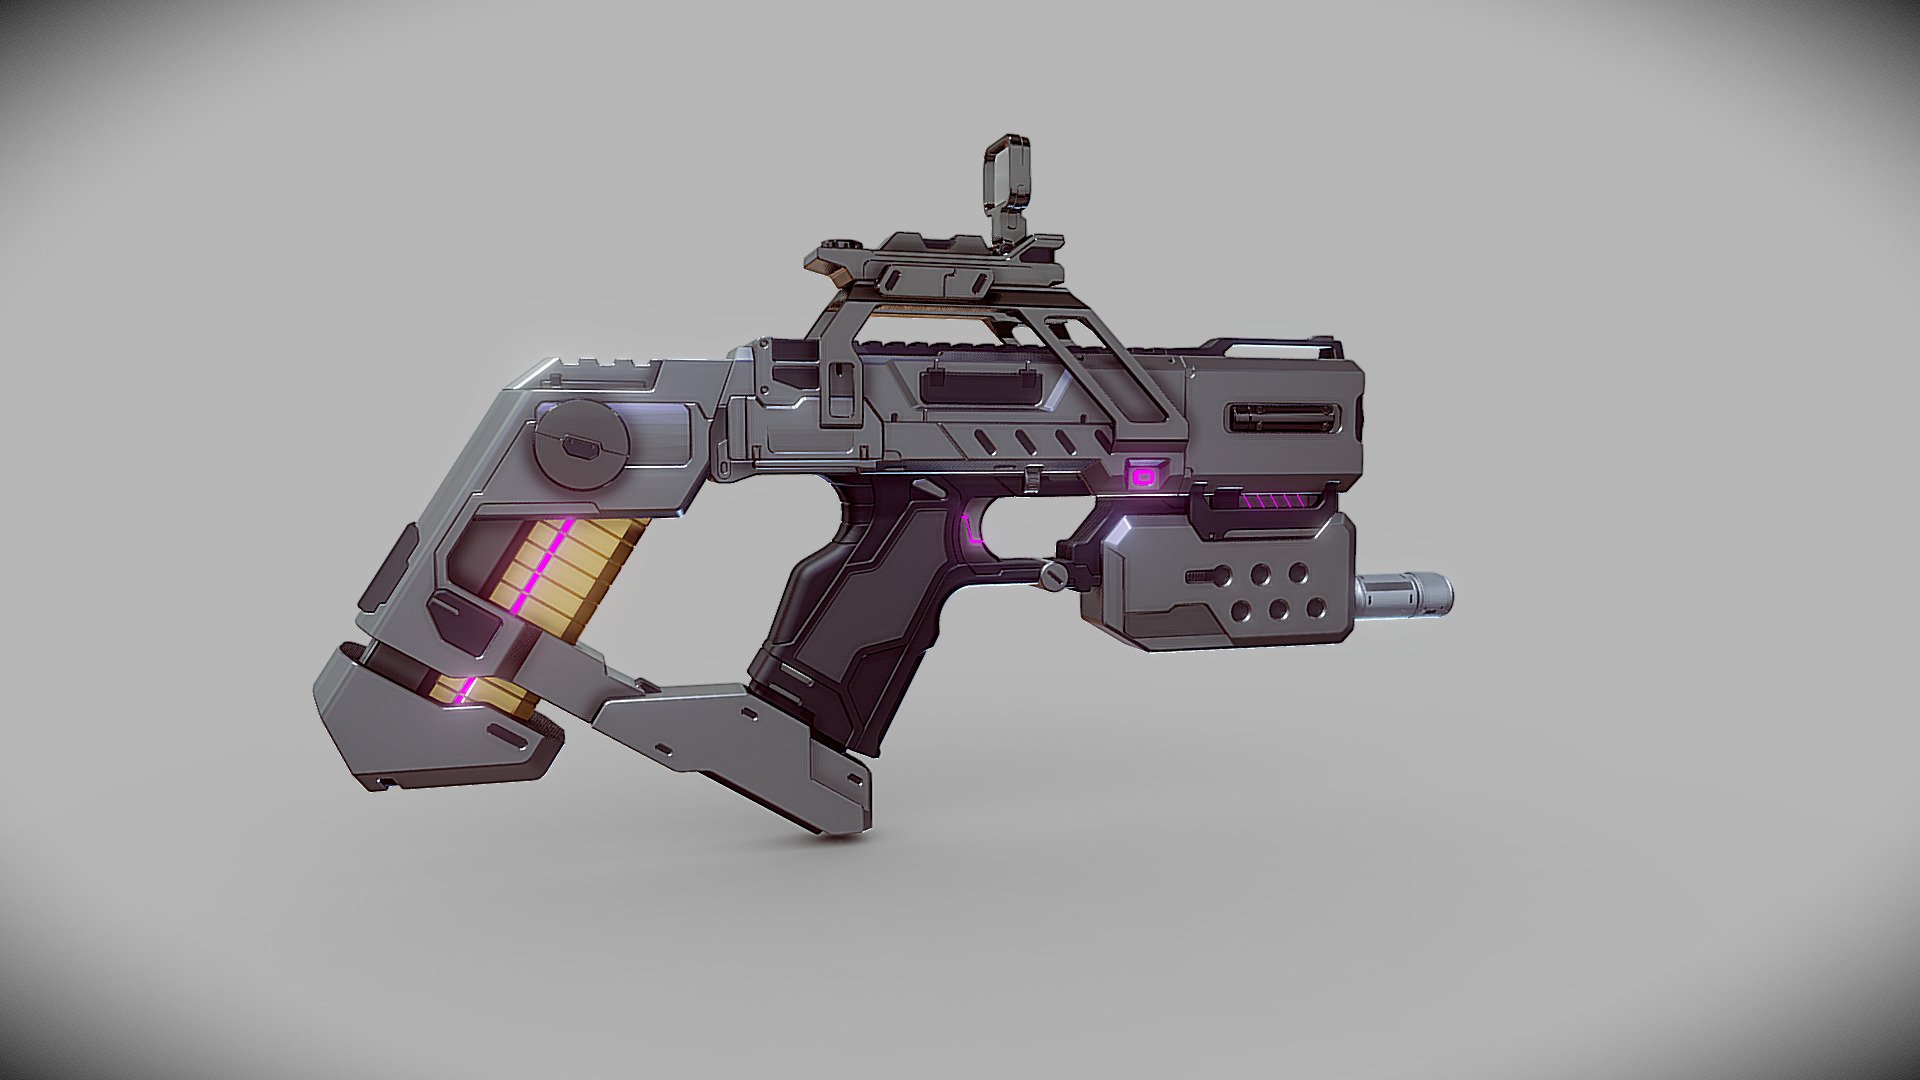 trying/messing around with houdini + kitbash meshes, came up with this style of smg - Procedural Generated SMG - 3D model by OGL (@GaryLim) 3d model